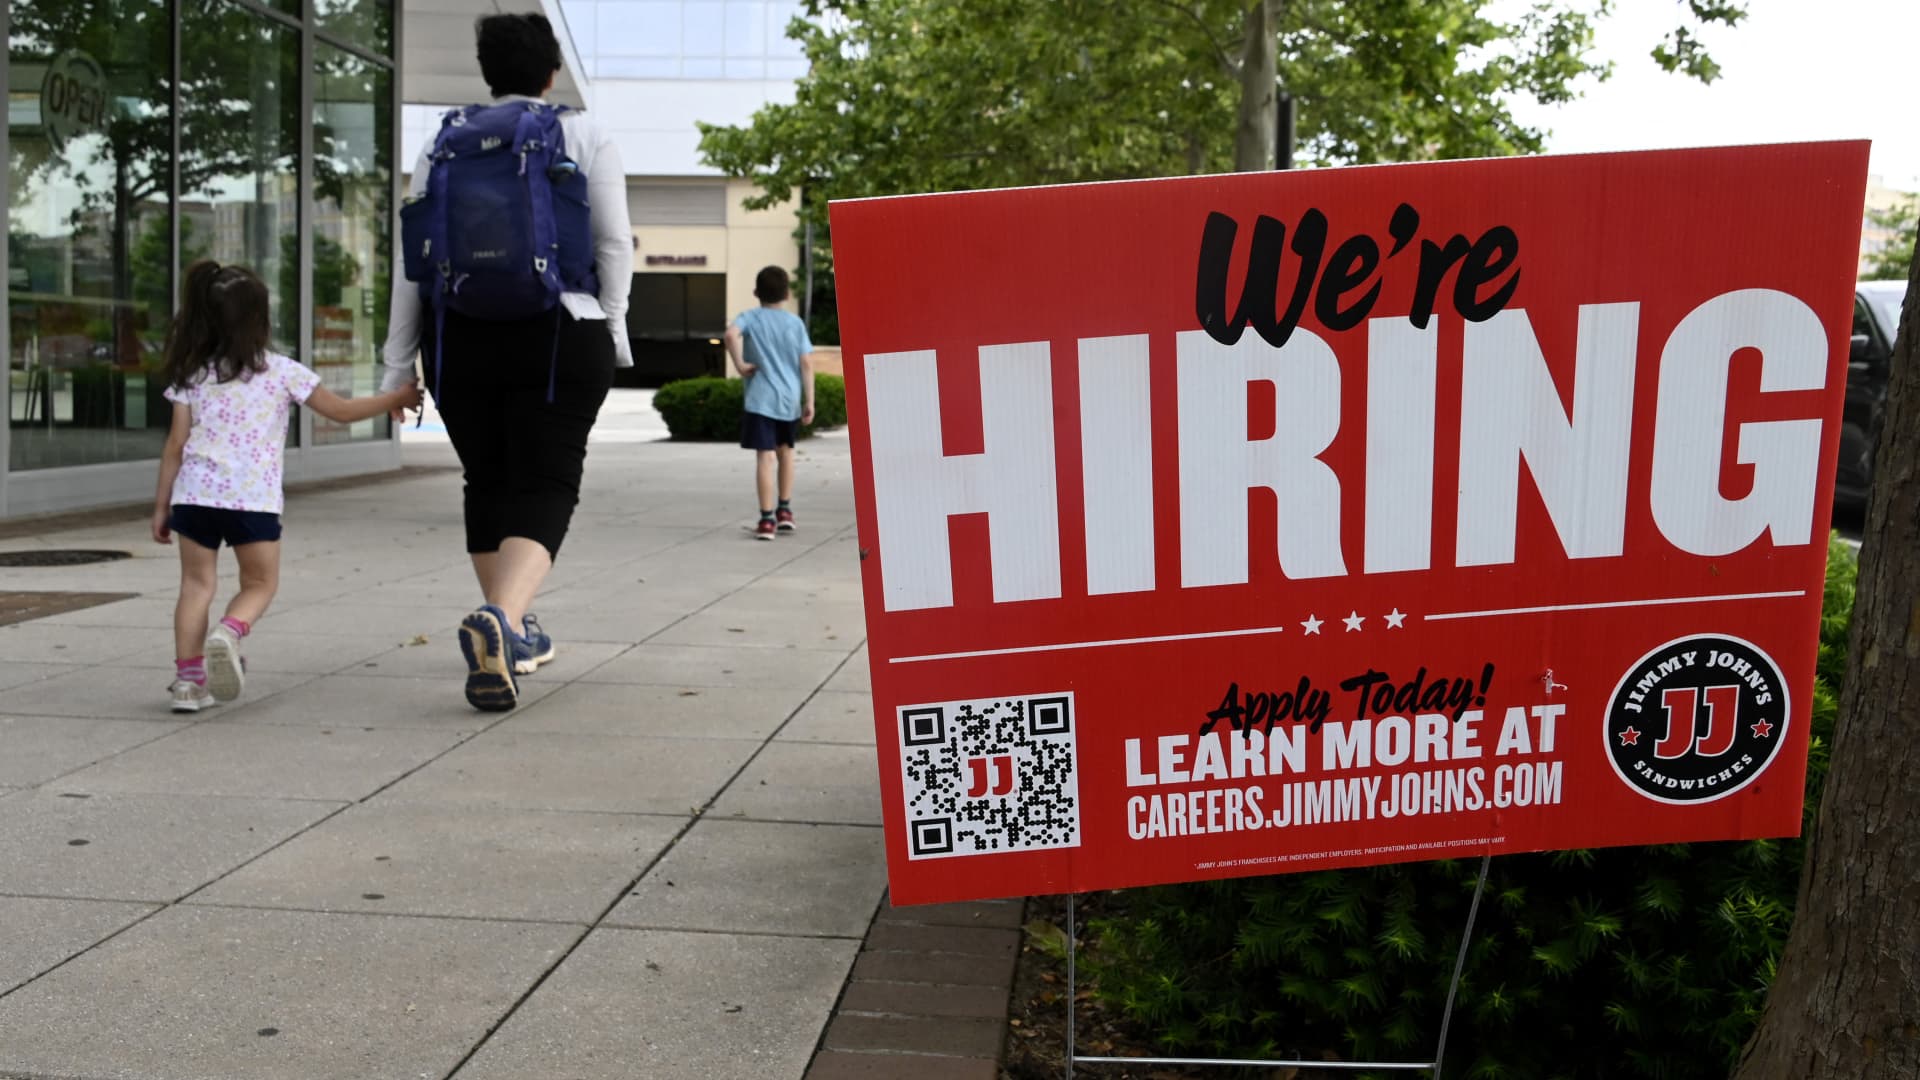 U.S. weekly jobless claims grind lower amid tight labor market